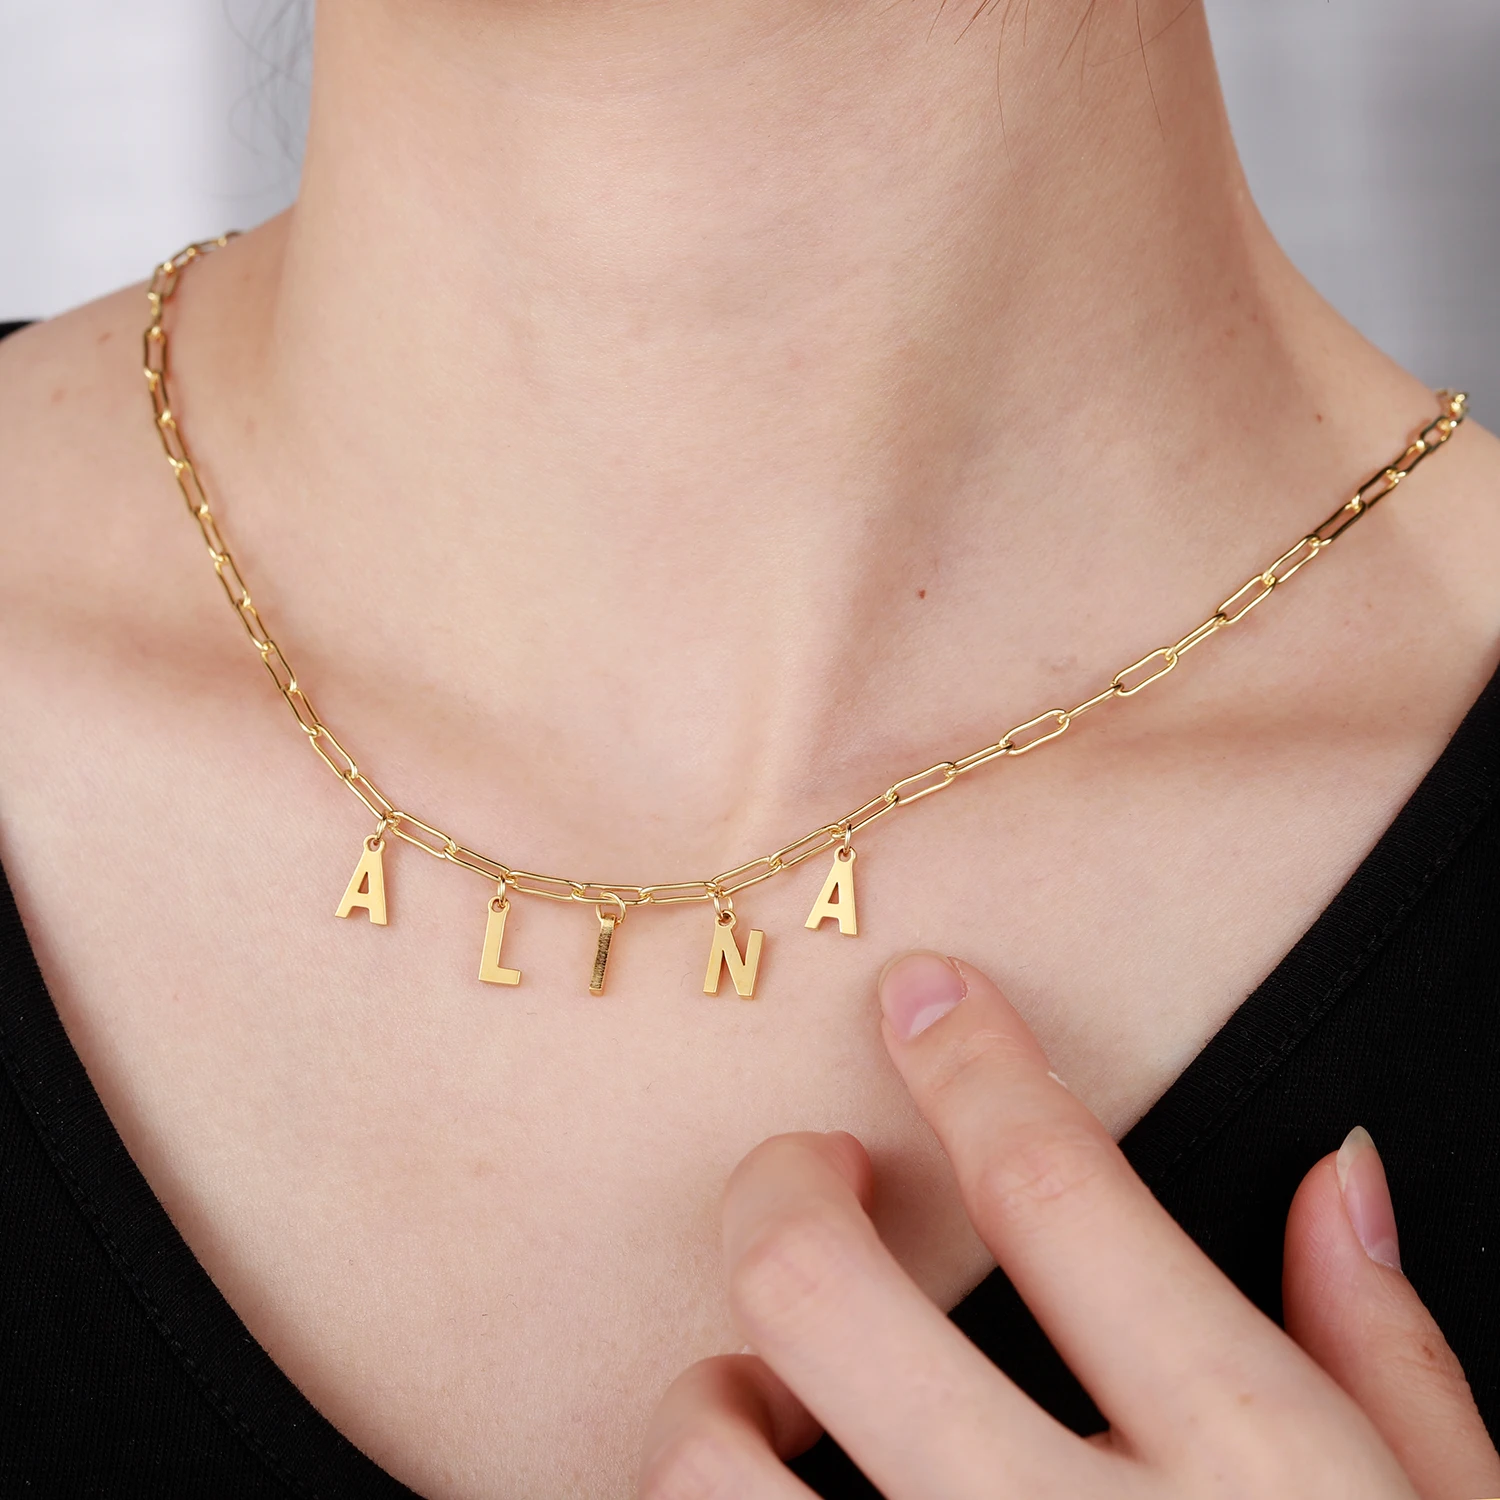 

New Fashion Multiple Letters Chain Customized Name Necklace Custom Namplate Necklace Stainless Steel Personalized Jewelry Gift